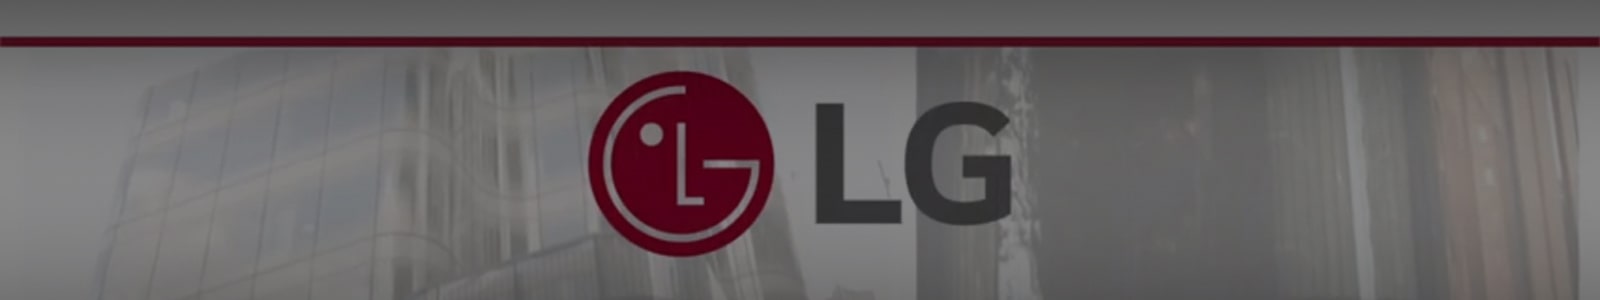 LG VRF Multi V Case Study Office Solution_Canada "7 St. Thomas Building_Revisited"1